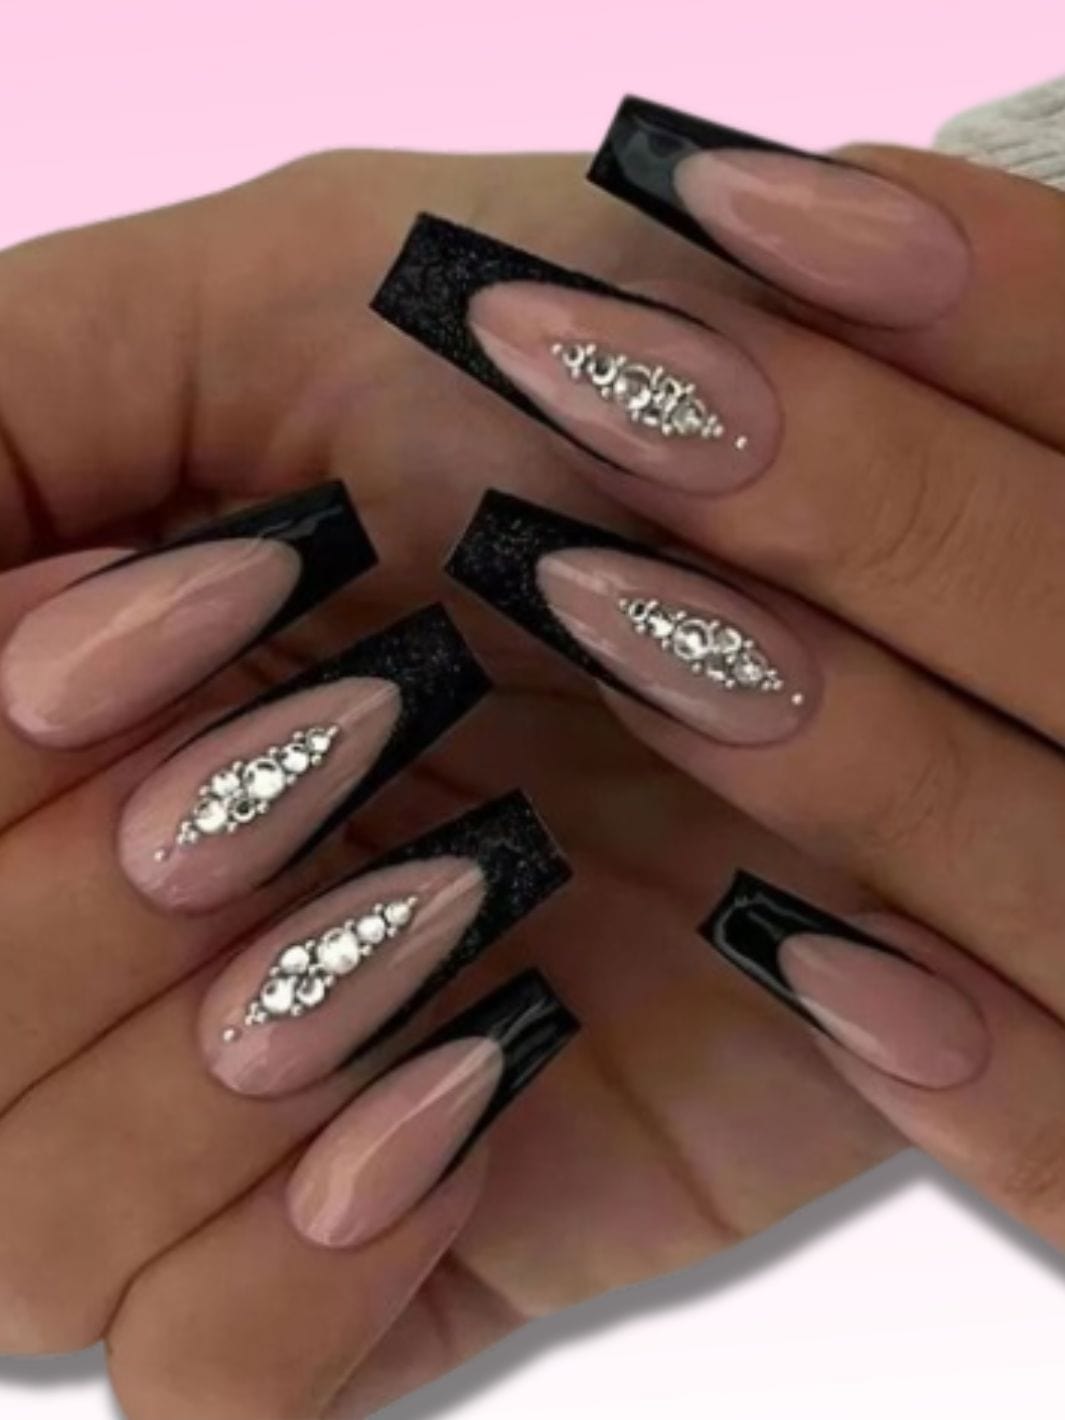 Manucure faux ongles pas cher Nail Chic